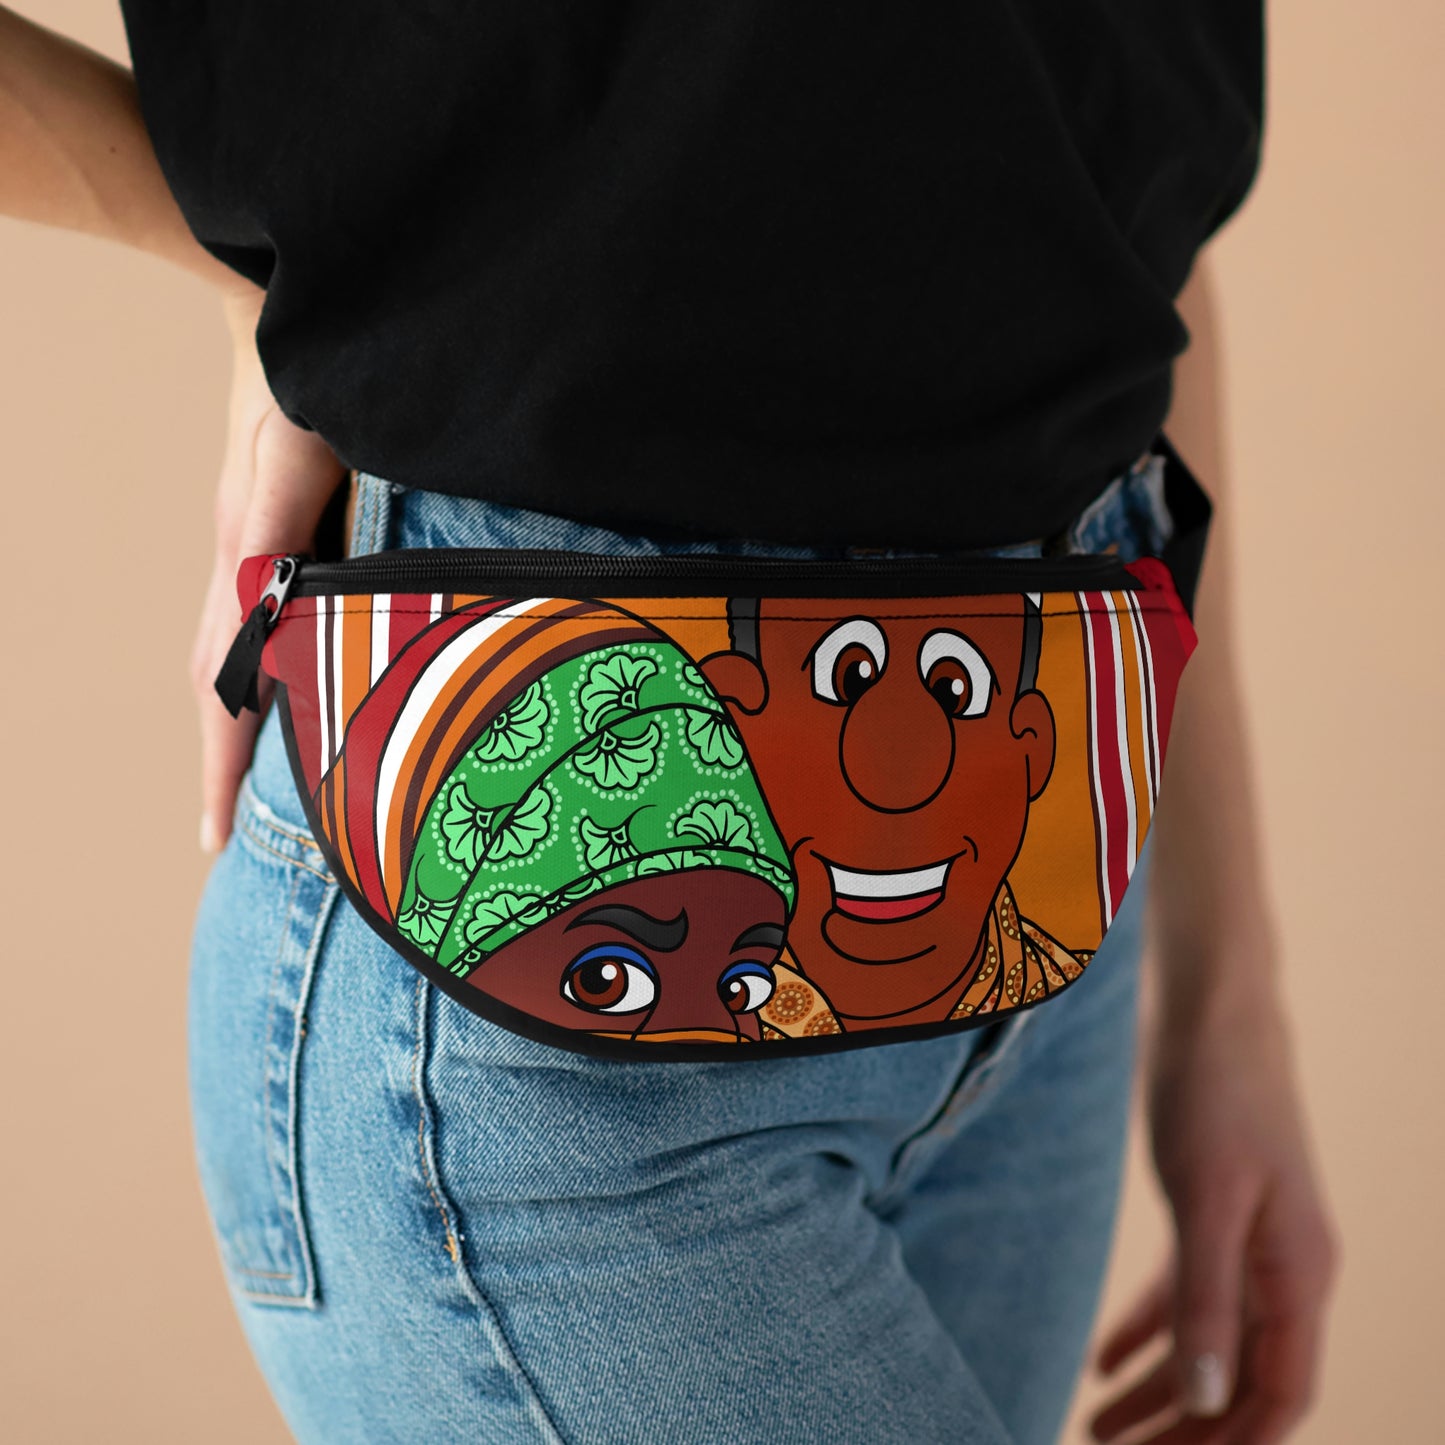 The Kitty Cat Cried! Fanny Pack